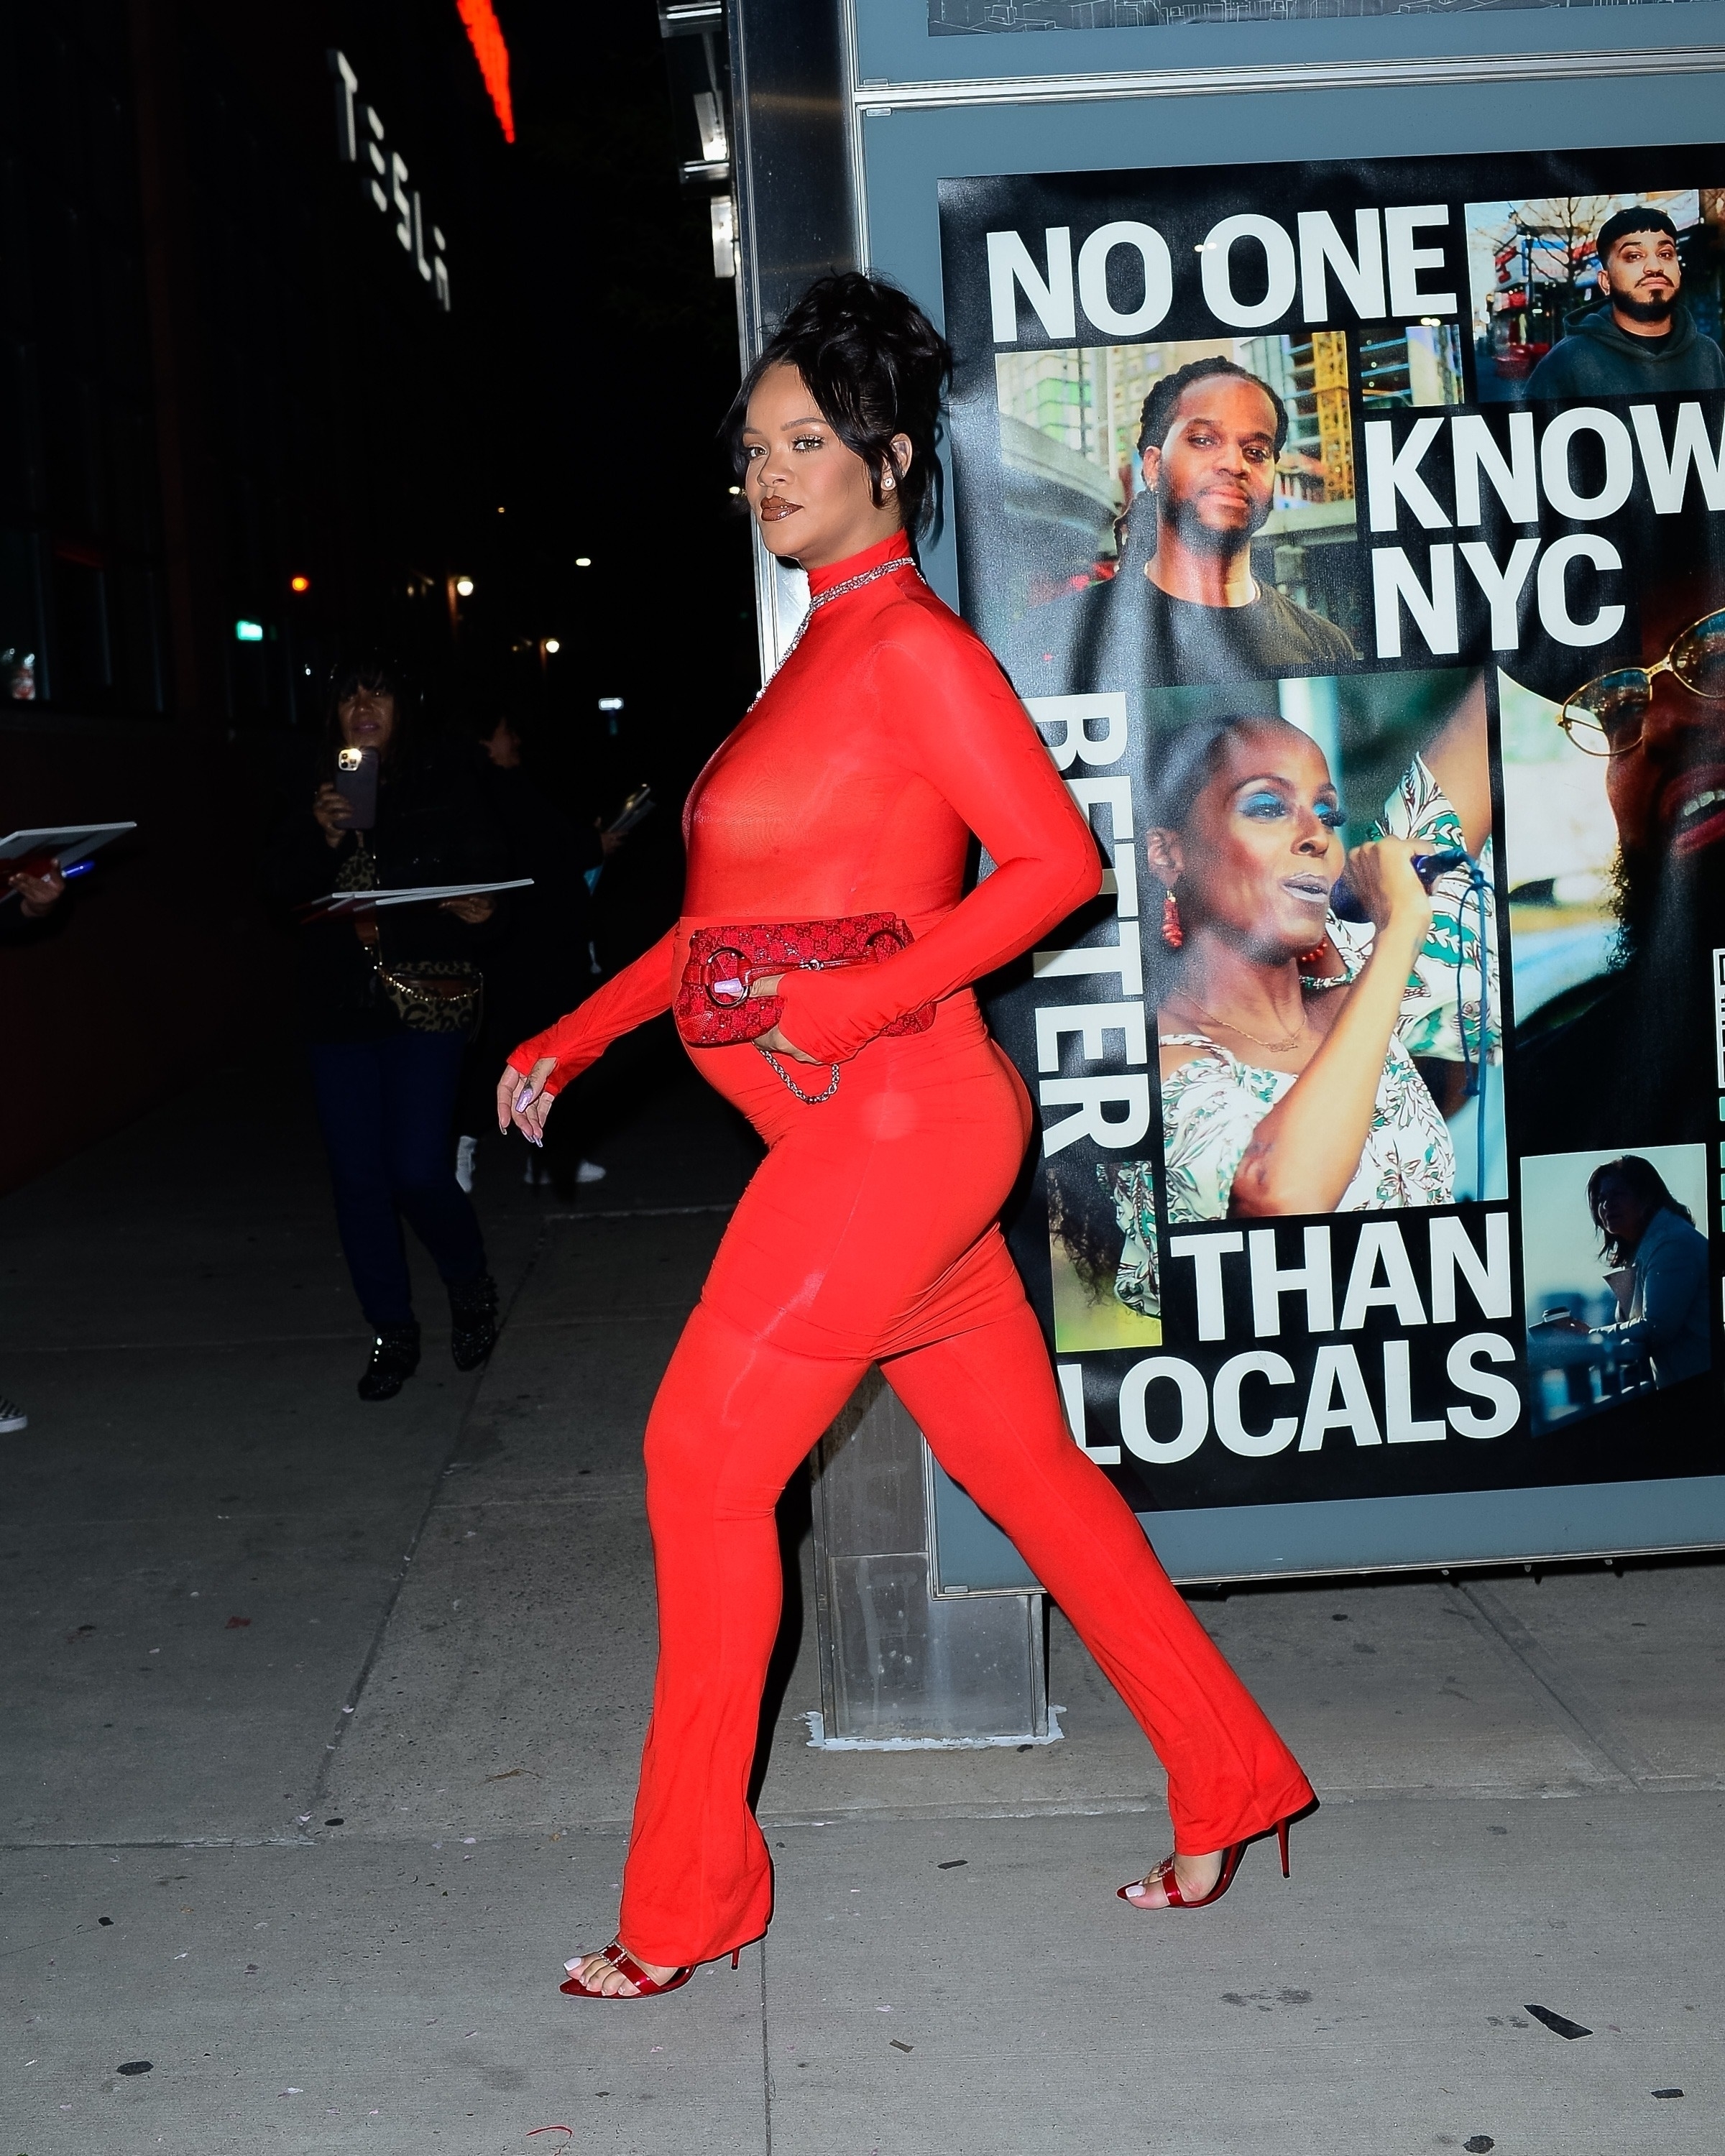 Rihanna Wore the Tom Ford-Era Gucci Bag That's Coming Back